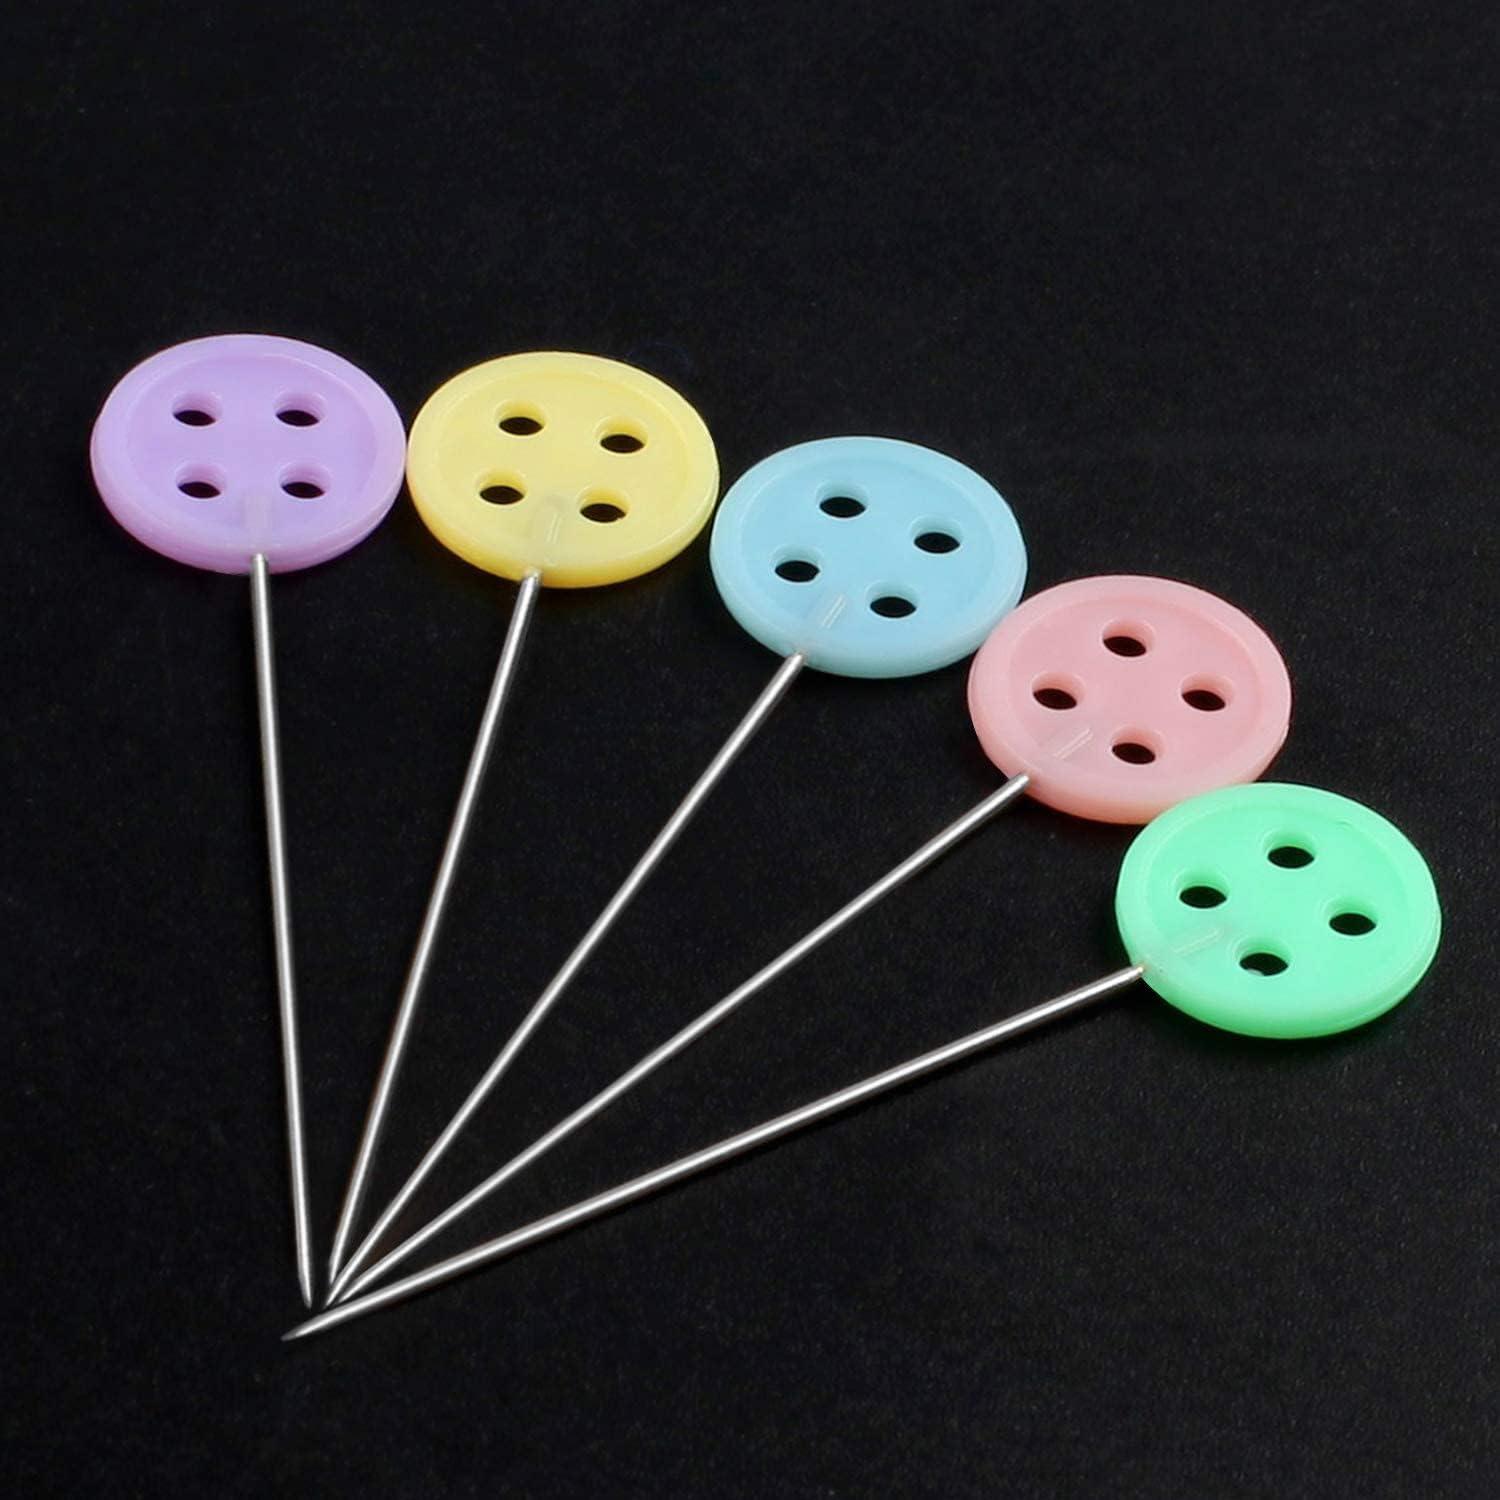 200 PCS Flat Head Pins Straight Pins Sewing Pins for Fabric Button